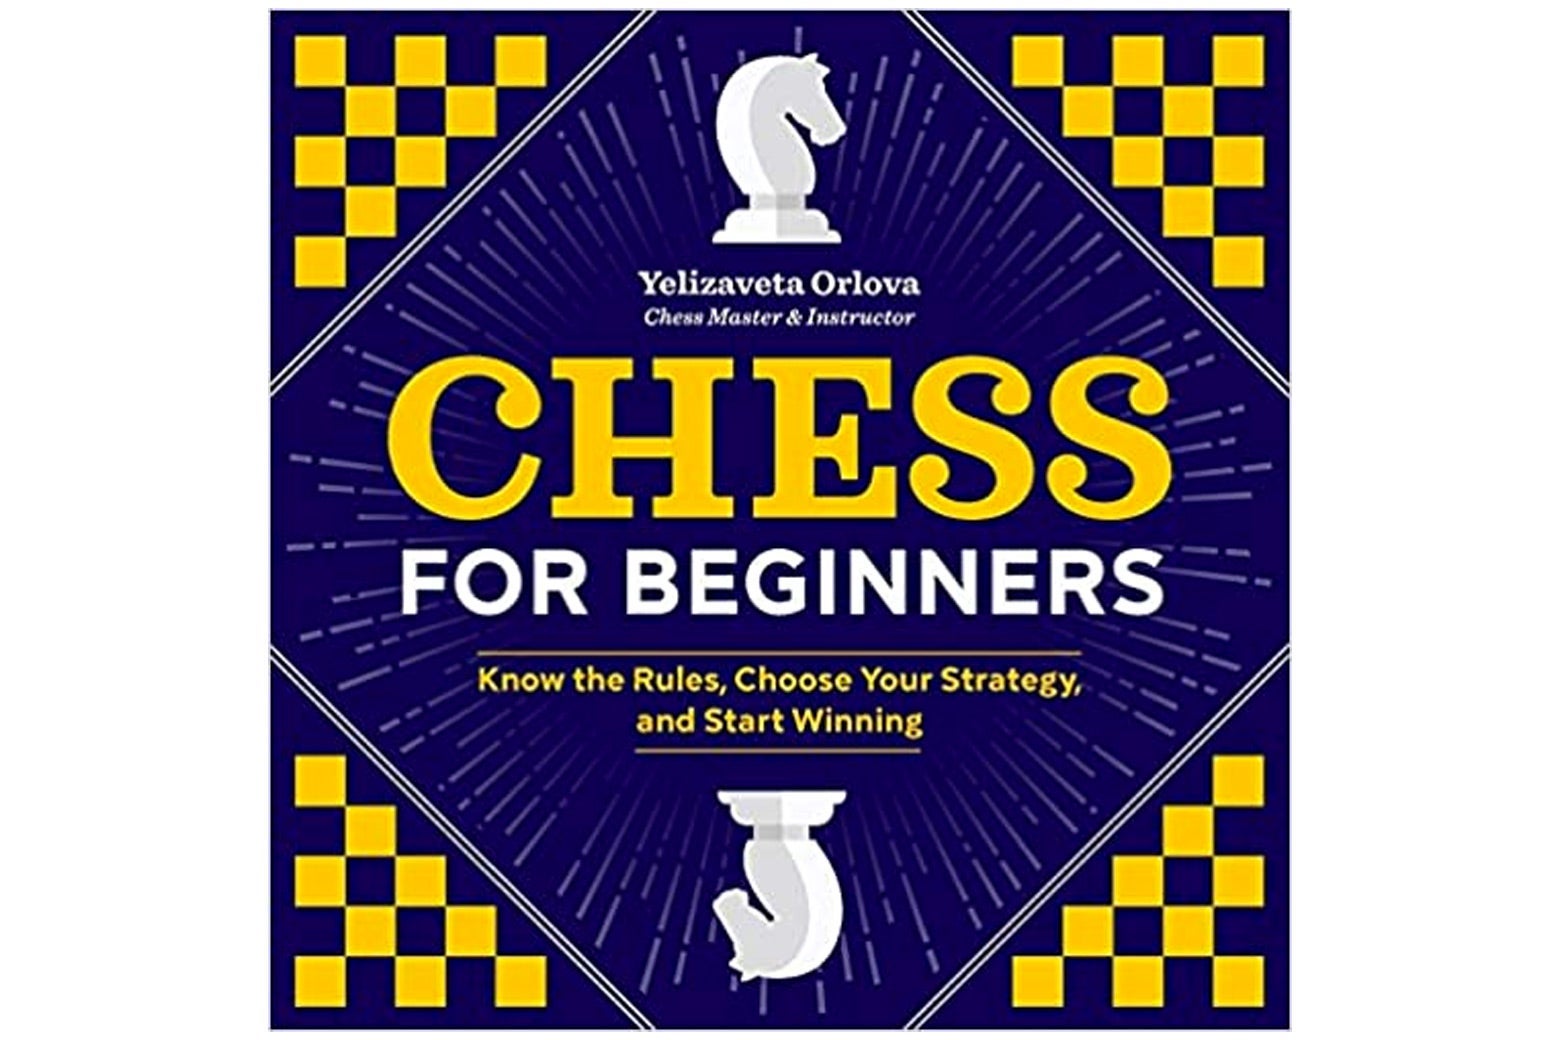 Chess for Beginners book jacket